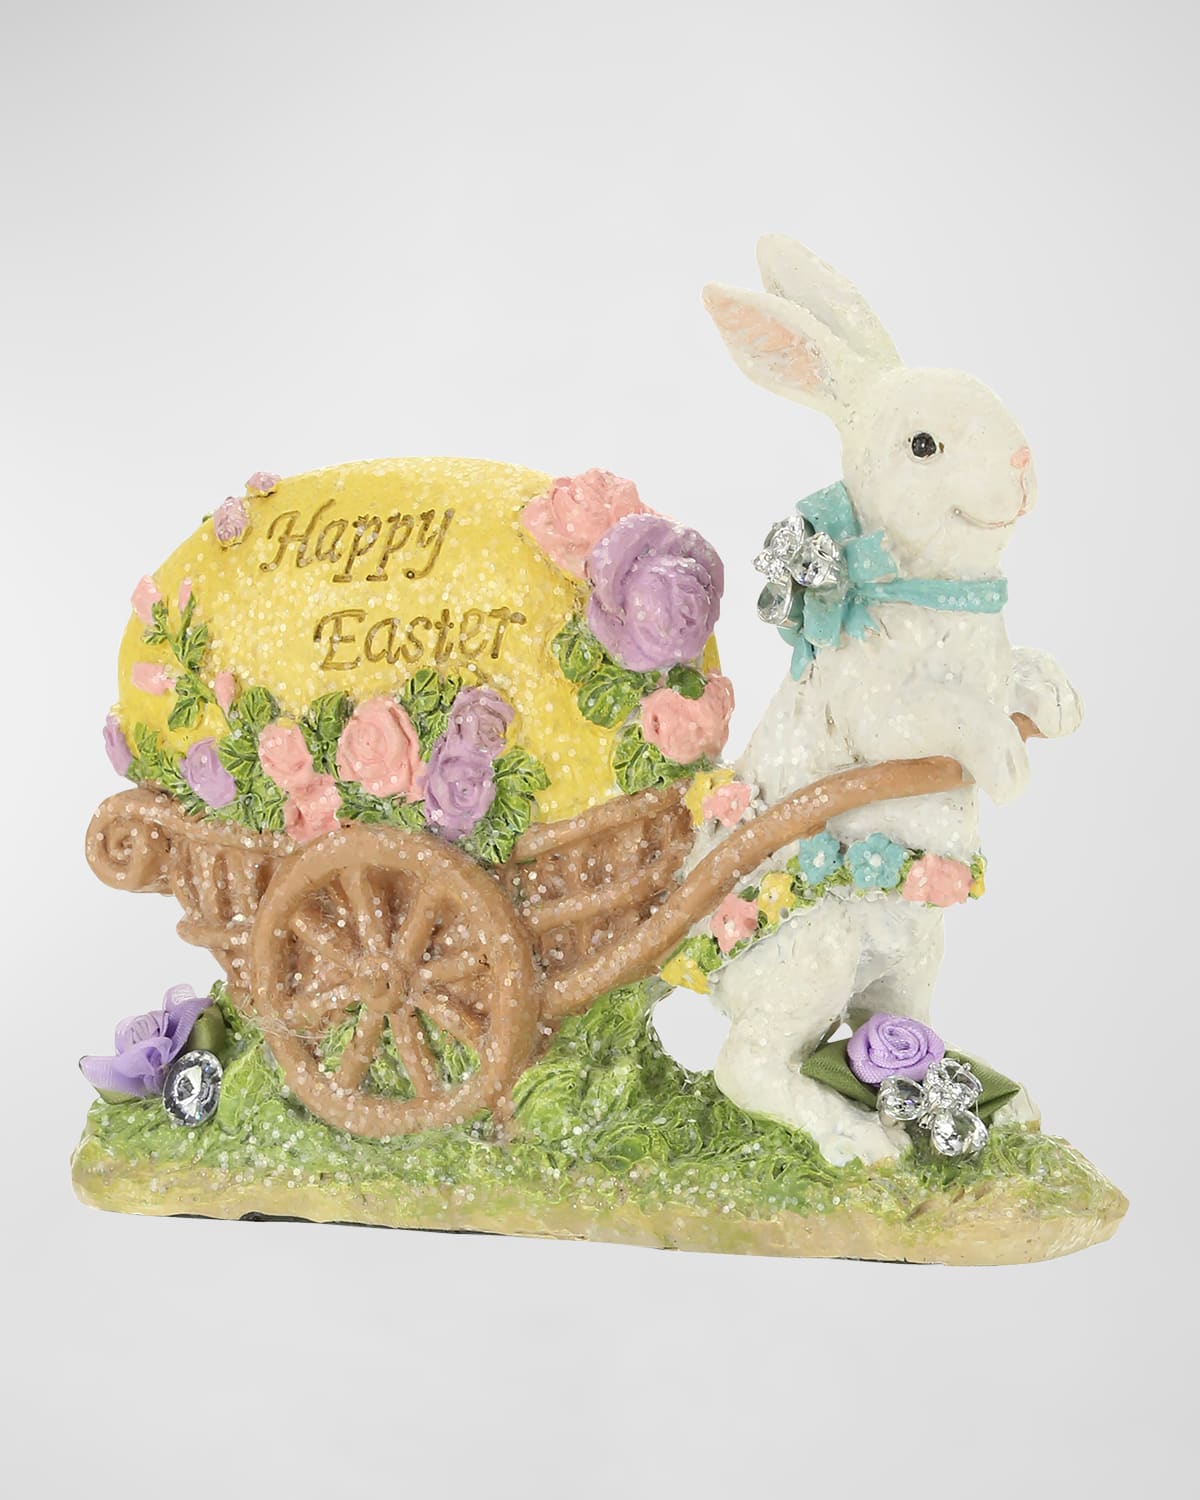 Jeweled Bunny with Egg Carriage - 7 x 6"